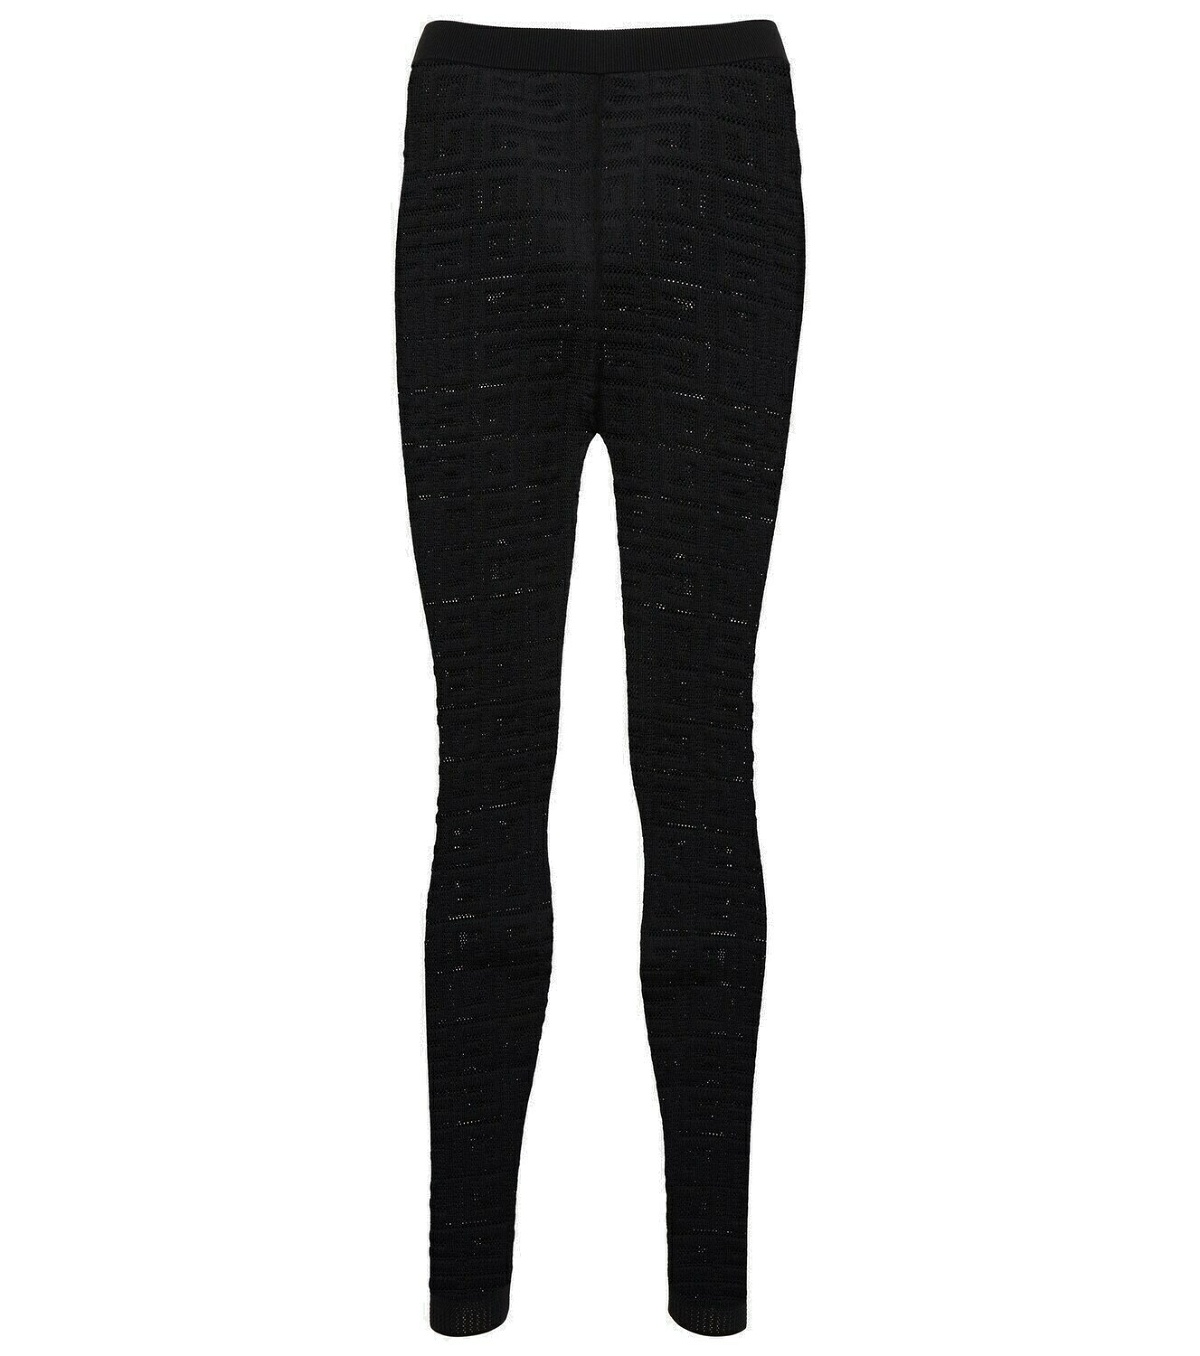 Pink Viscose Leggings by Givenchy on Sale